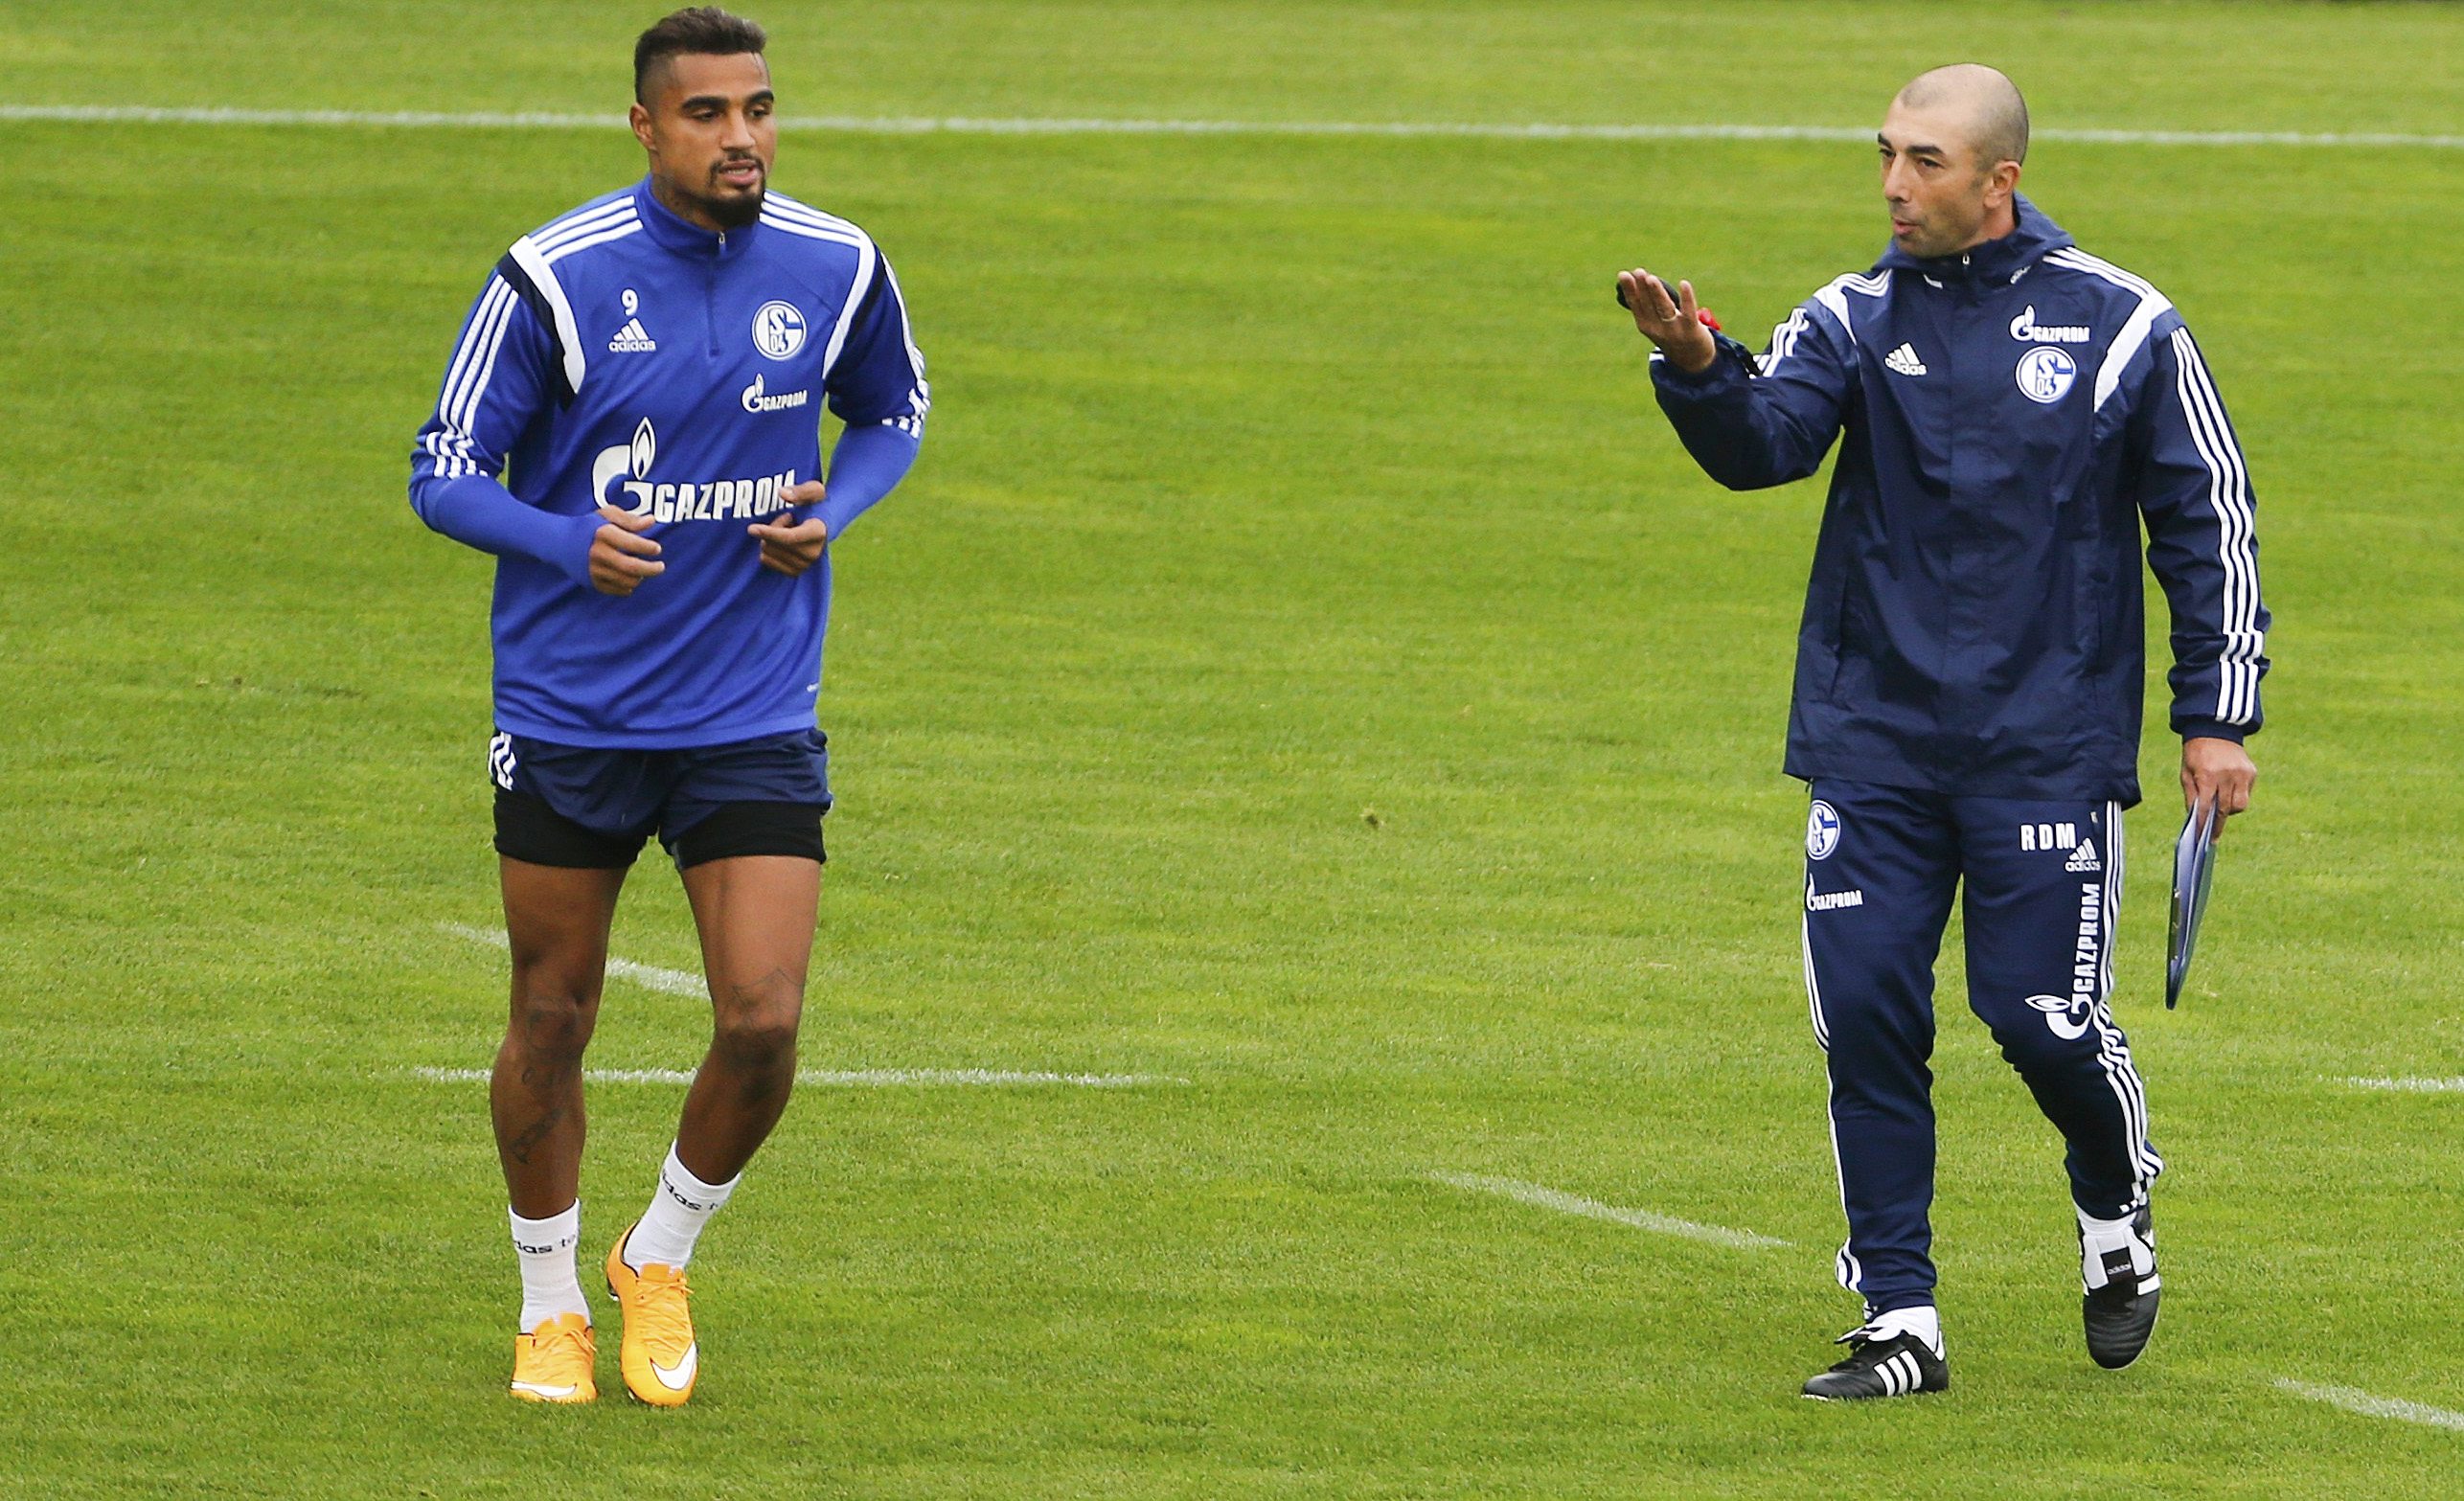 Schalke 04's new coach Roberto Di Matteo reacts next to player Kevin-Prince Boateng (L) during his first training session as Schalke 04's head coach in Gelsenkirchen October 9, 2014. Schalke 04 appointed Di Matteo, former coach of the 2012 Champions League winner FC Chelsea, as a replacement for Jens Keller, who was sacked on Tuesday after an inconsistent start to the season. REUTERS/Wolfgang Rattay (GERMANY - Tags: SOCCER SPORT)